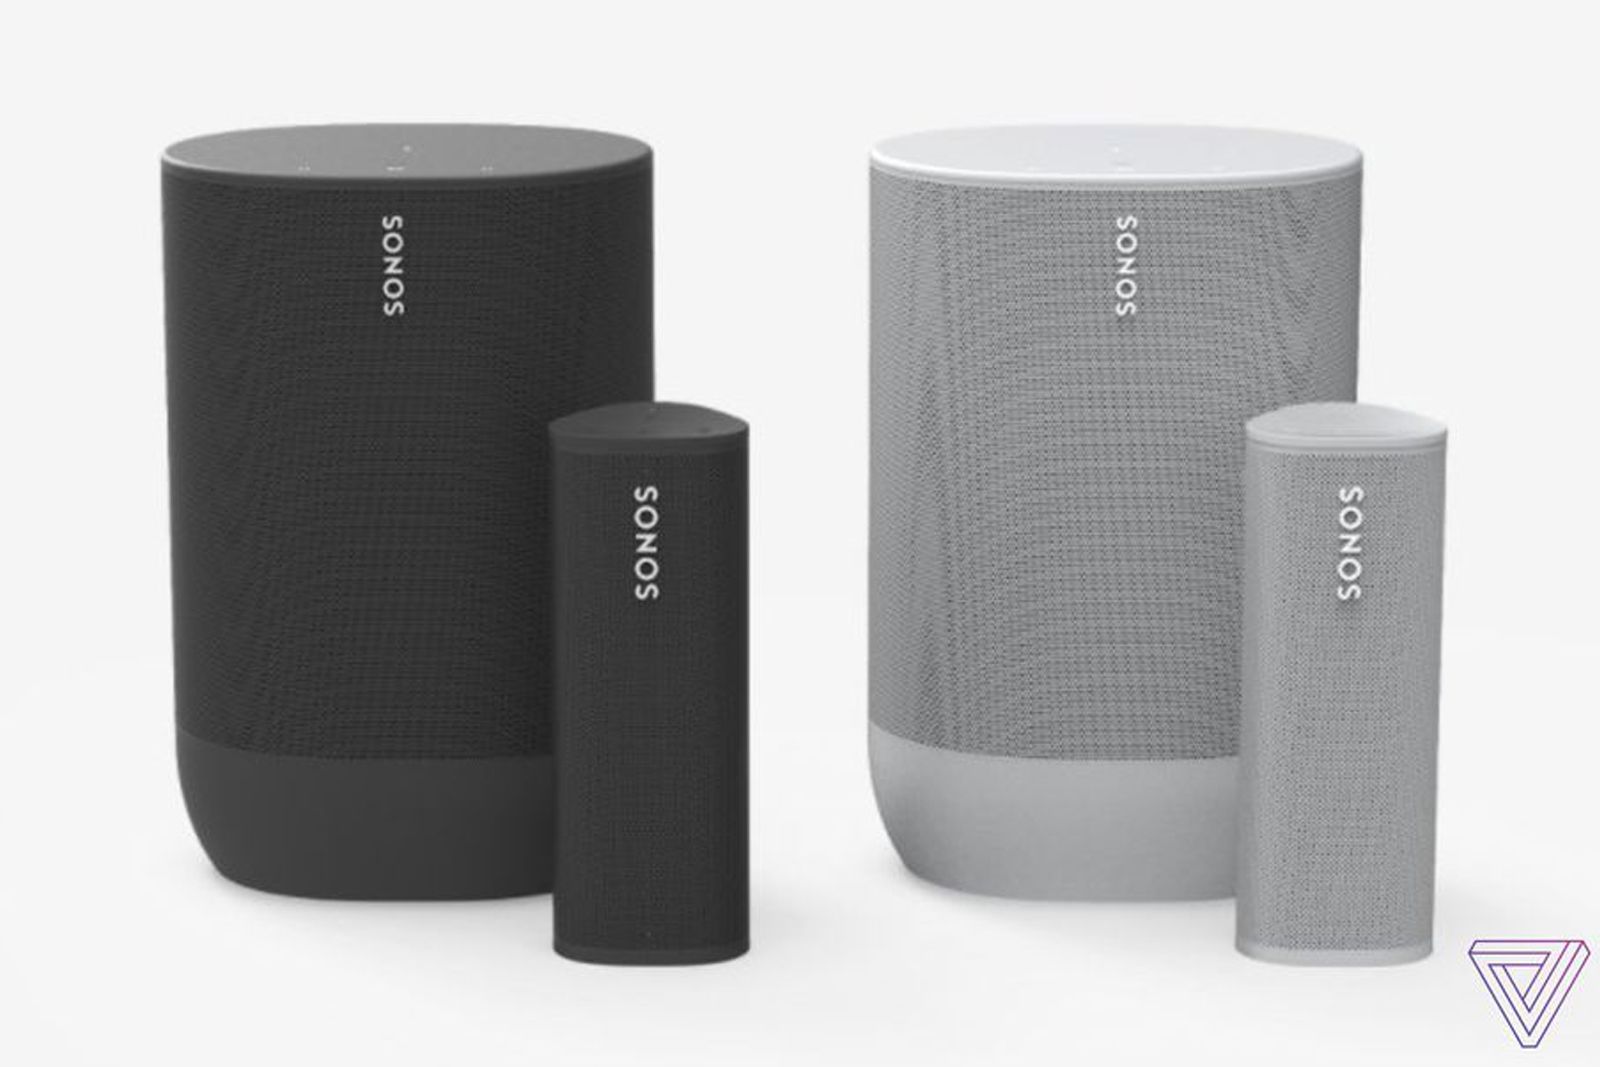 Sonos Roam will have more features than Sonos Move, like Sound Swap photo 1